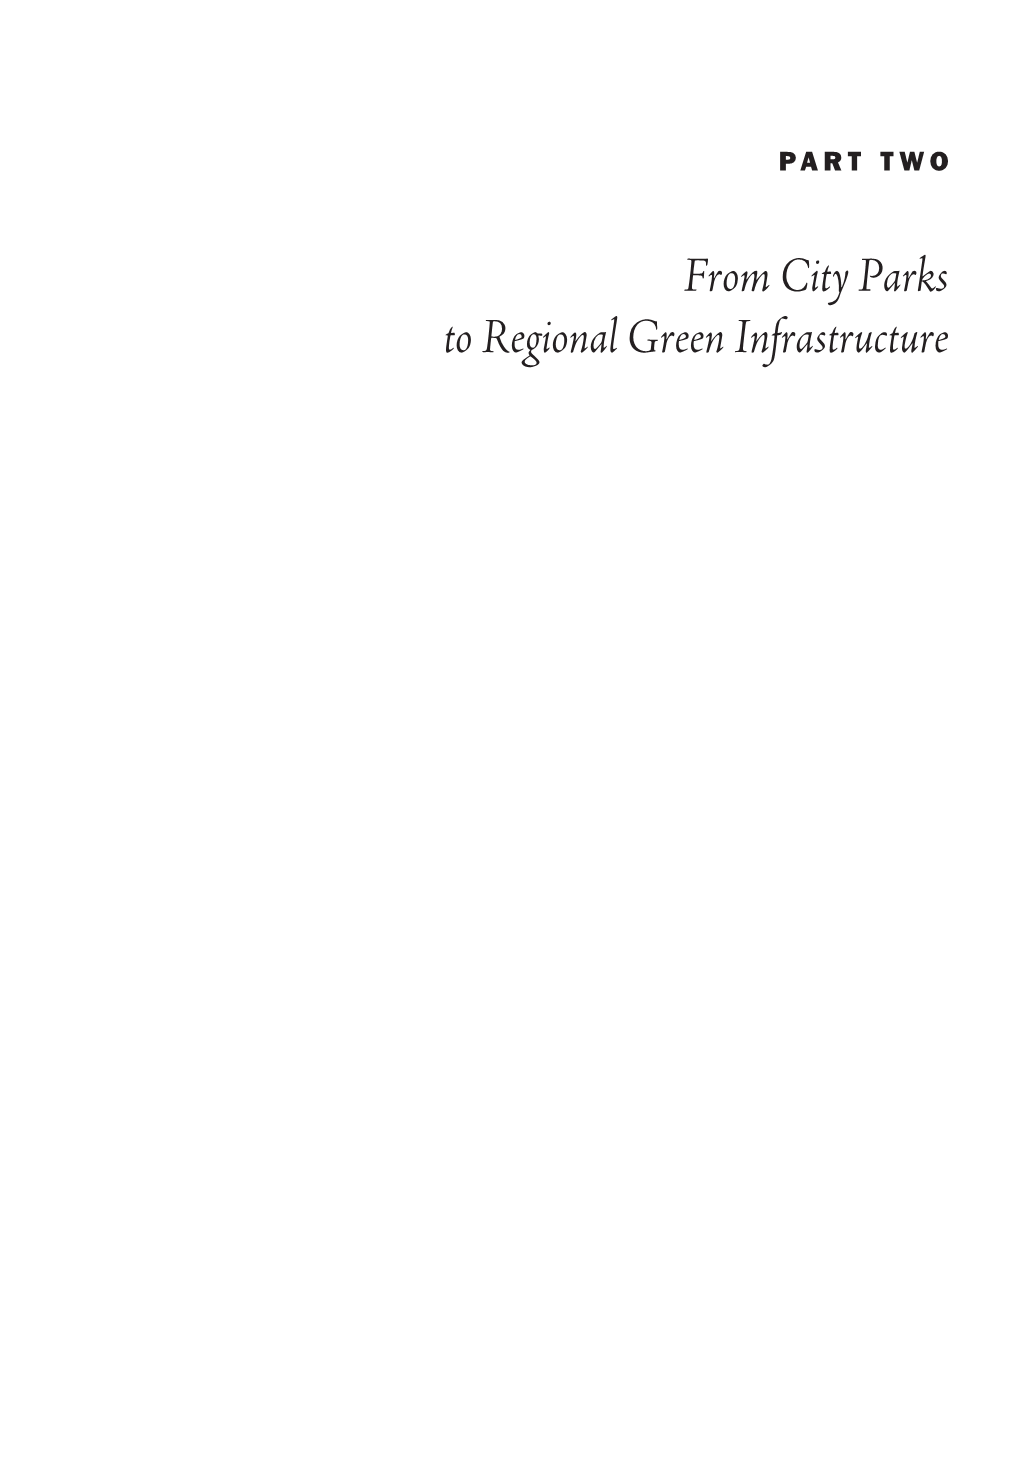 From City Parks to Regional Green Infrastructure